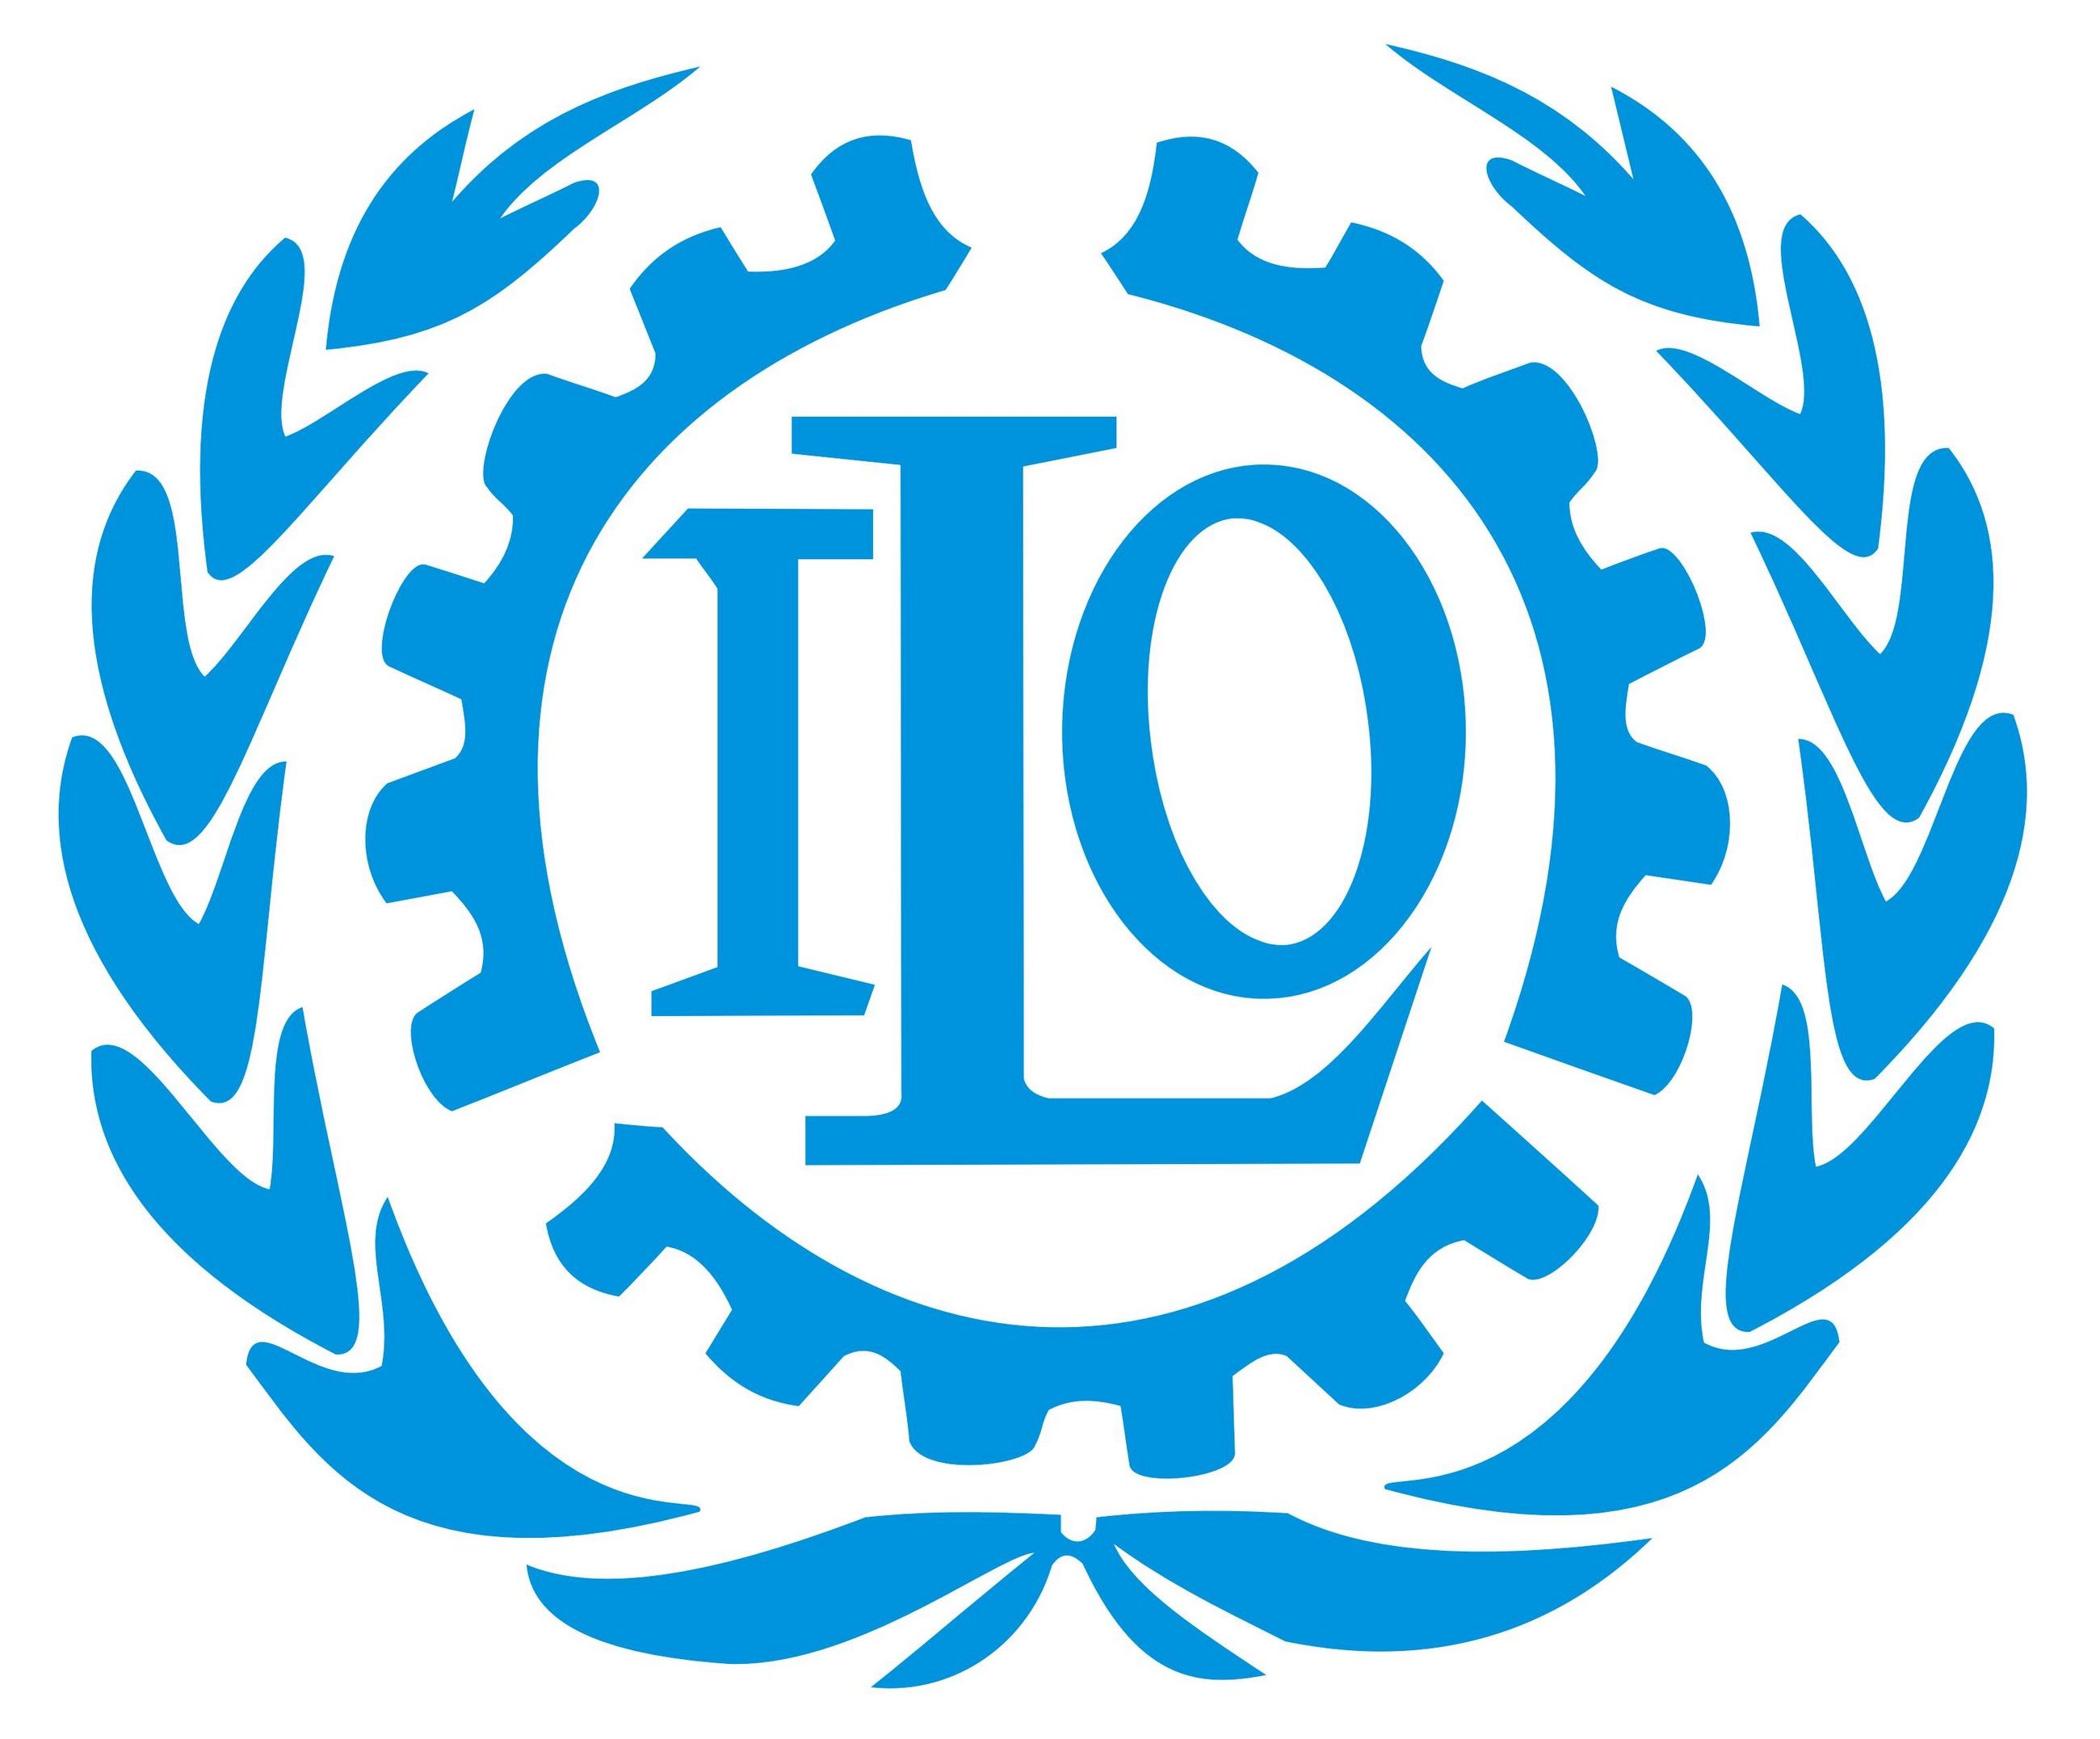 The title "ILO" in blue over a white background.